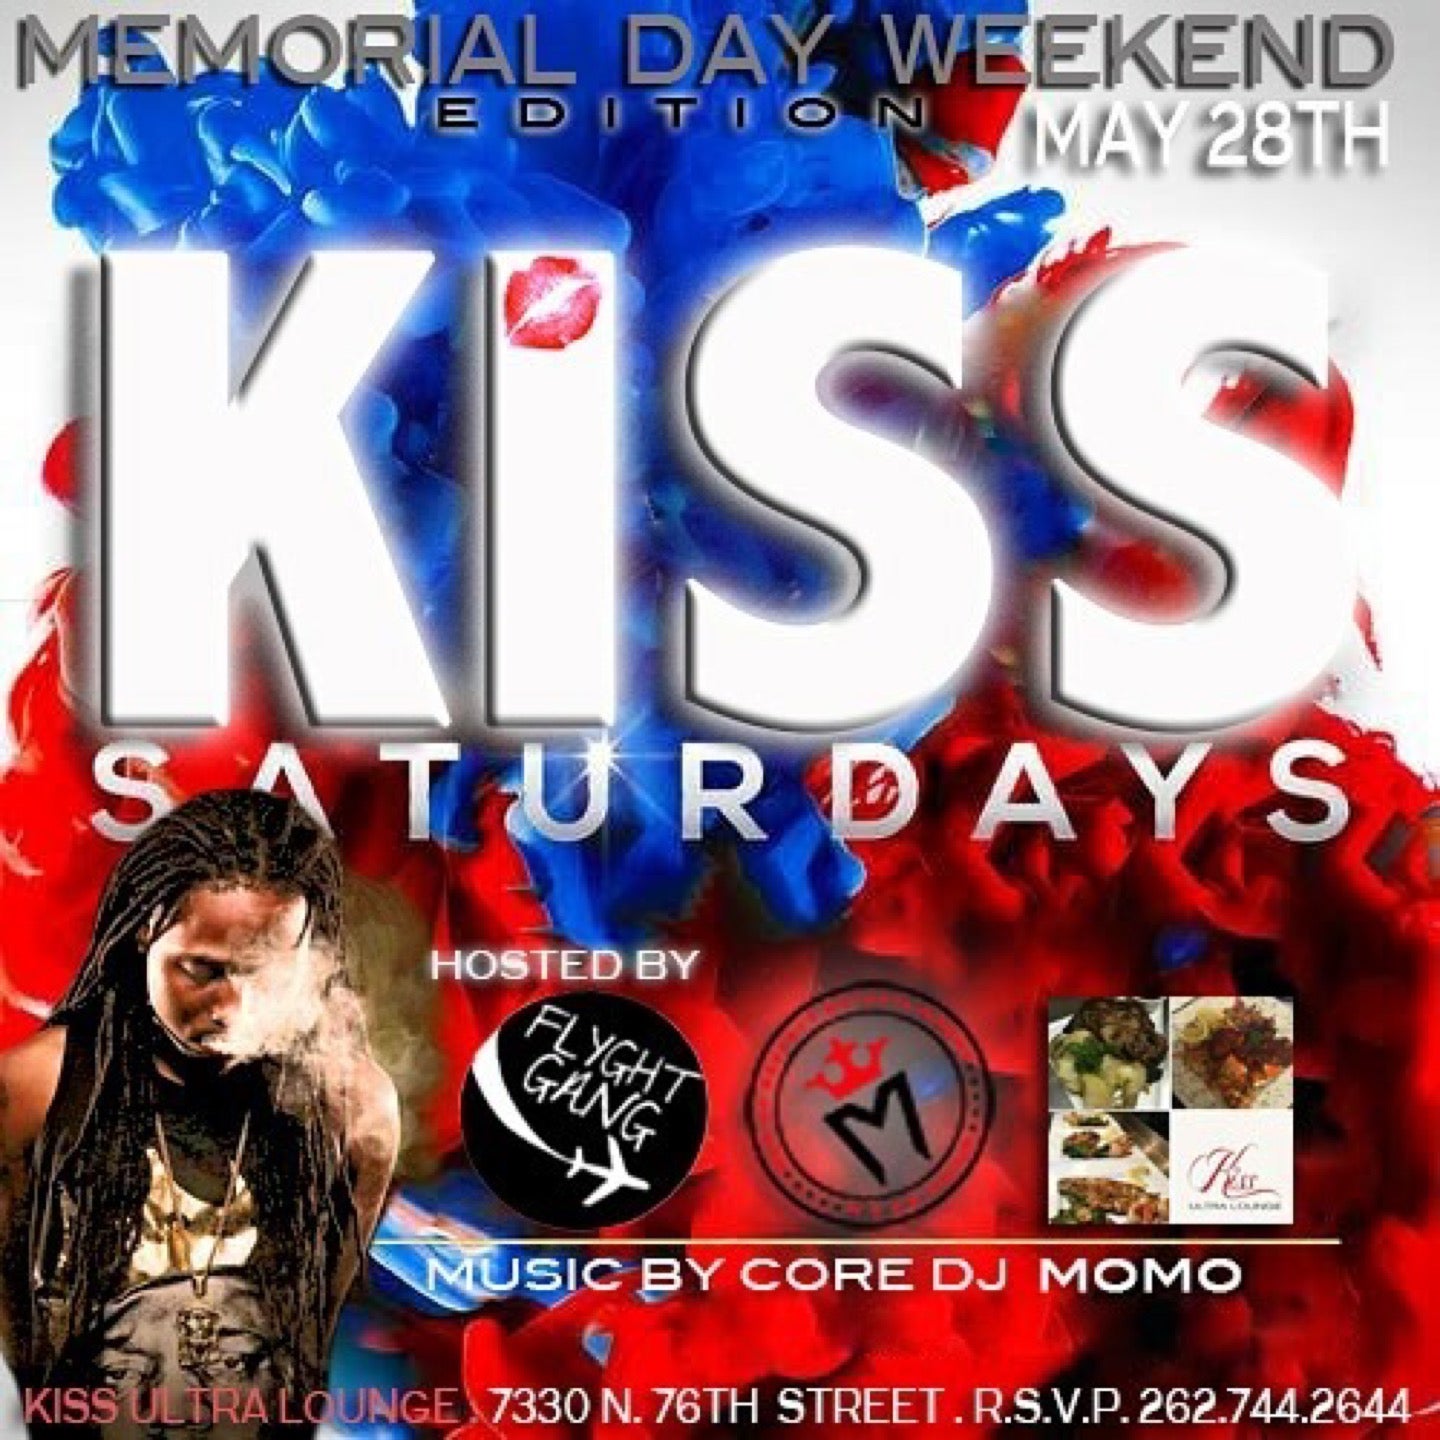 Kiss Ultra Lounge, 7330 N 76th St, Milwaukee, WI, Cocktail Lounges